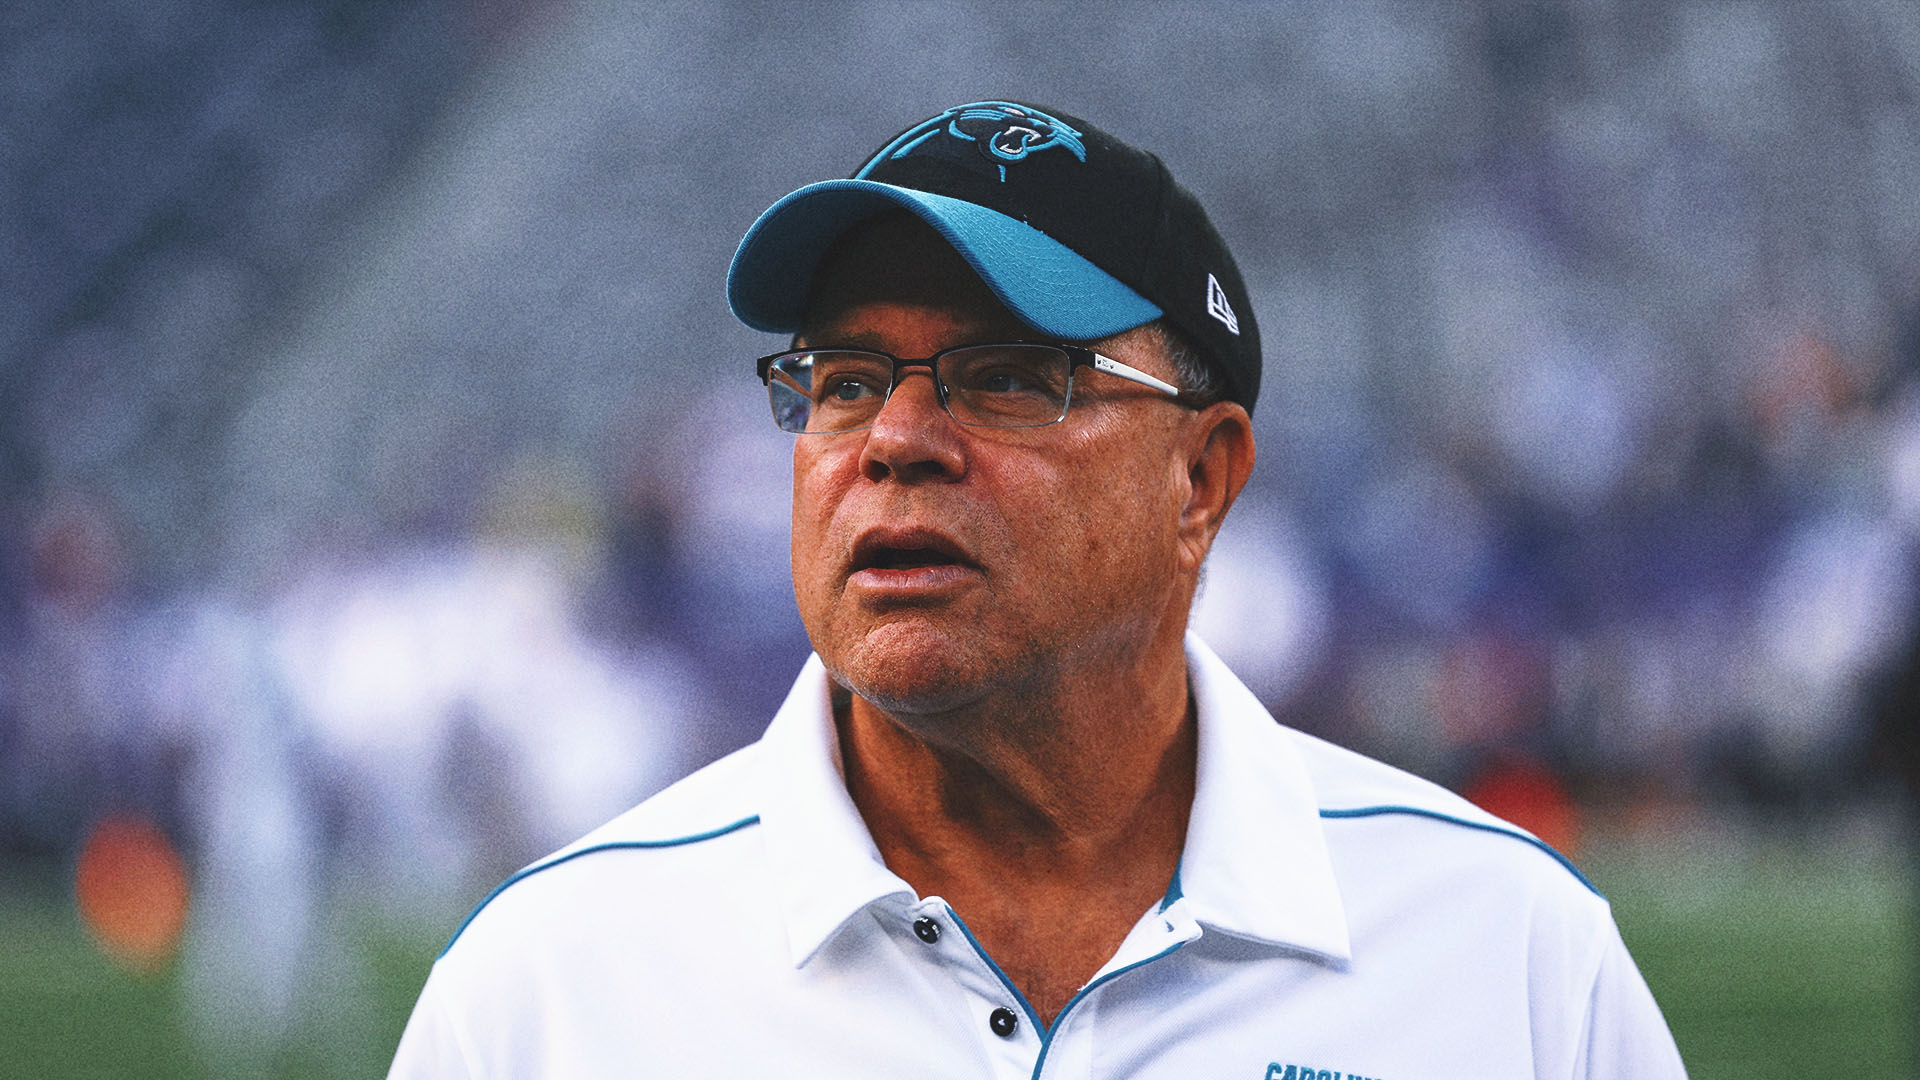 
					Panthers owner David Tepper levied $300k fine for tossing drink at fan
				